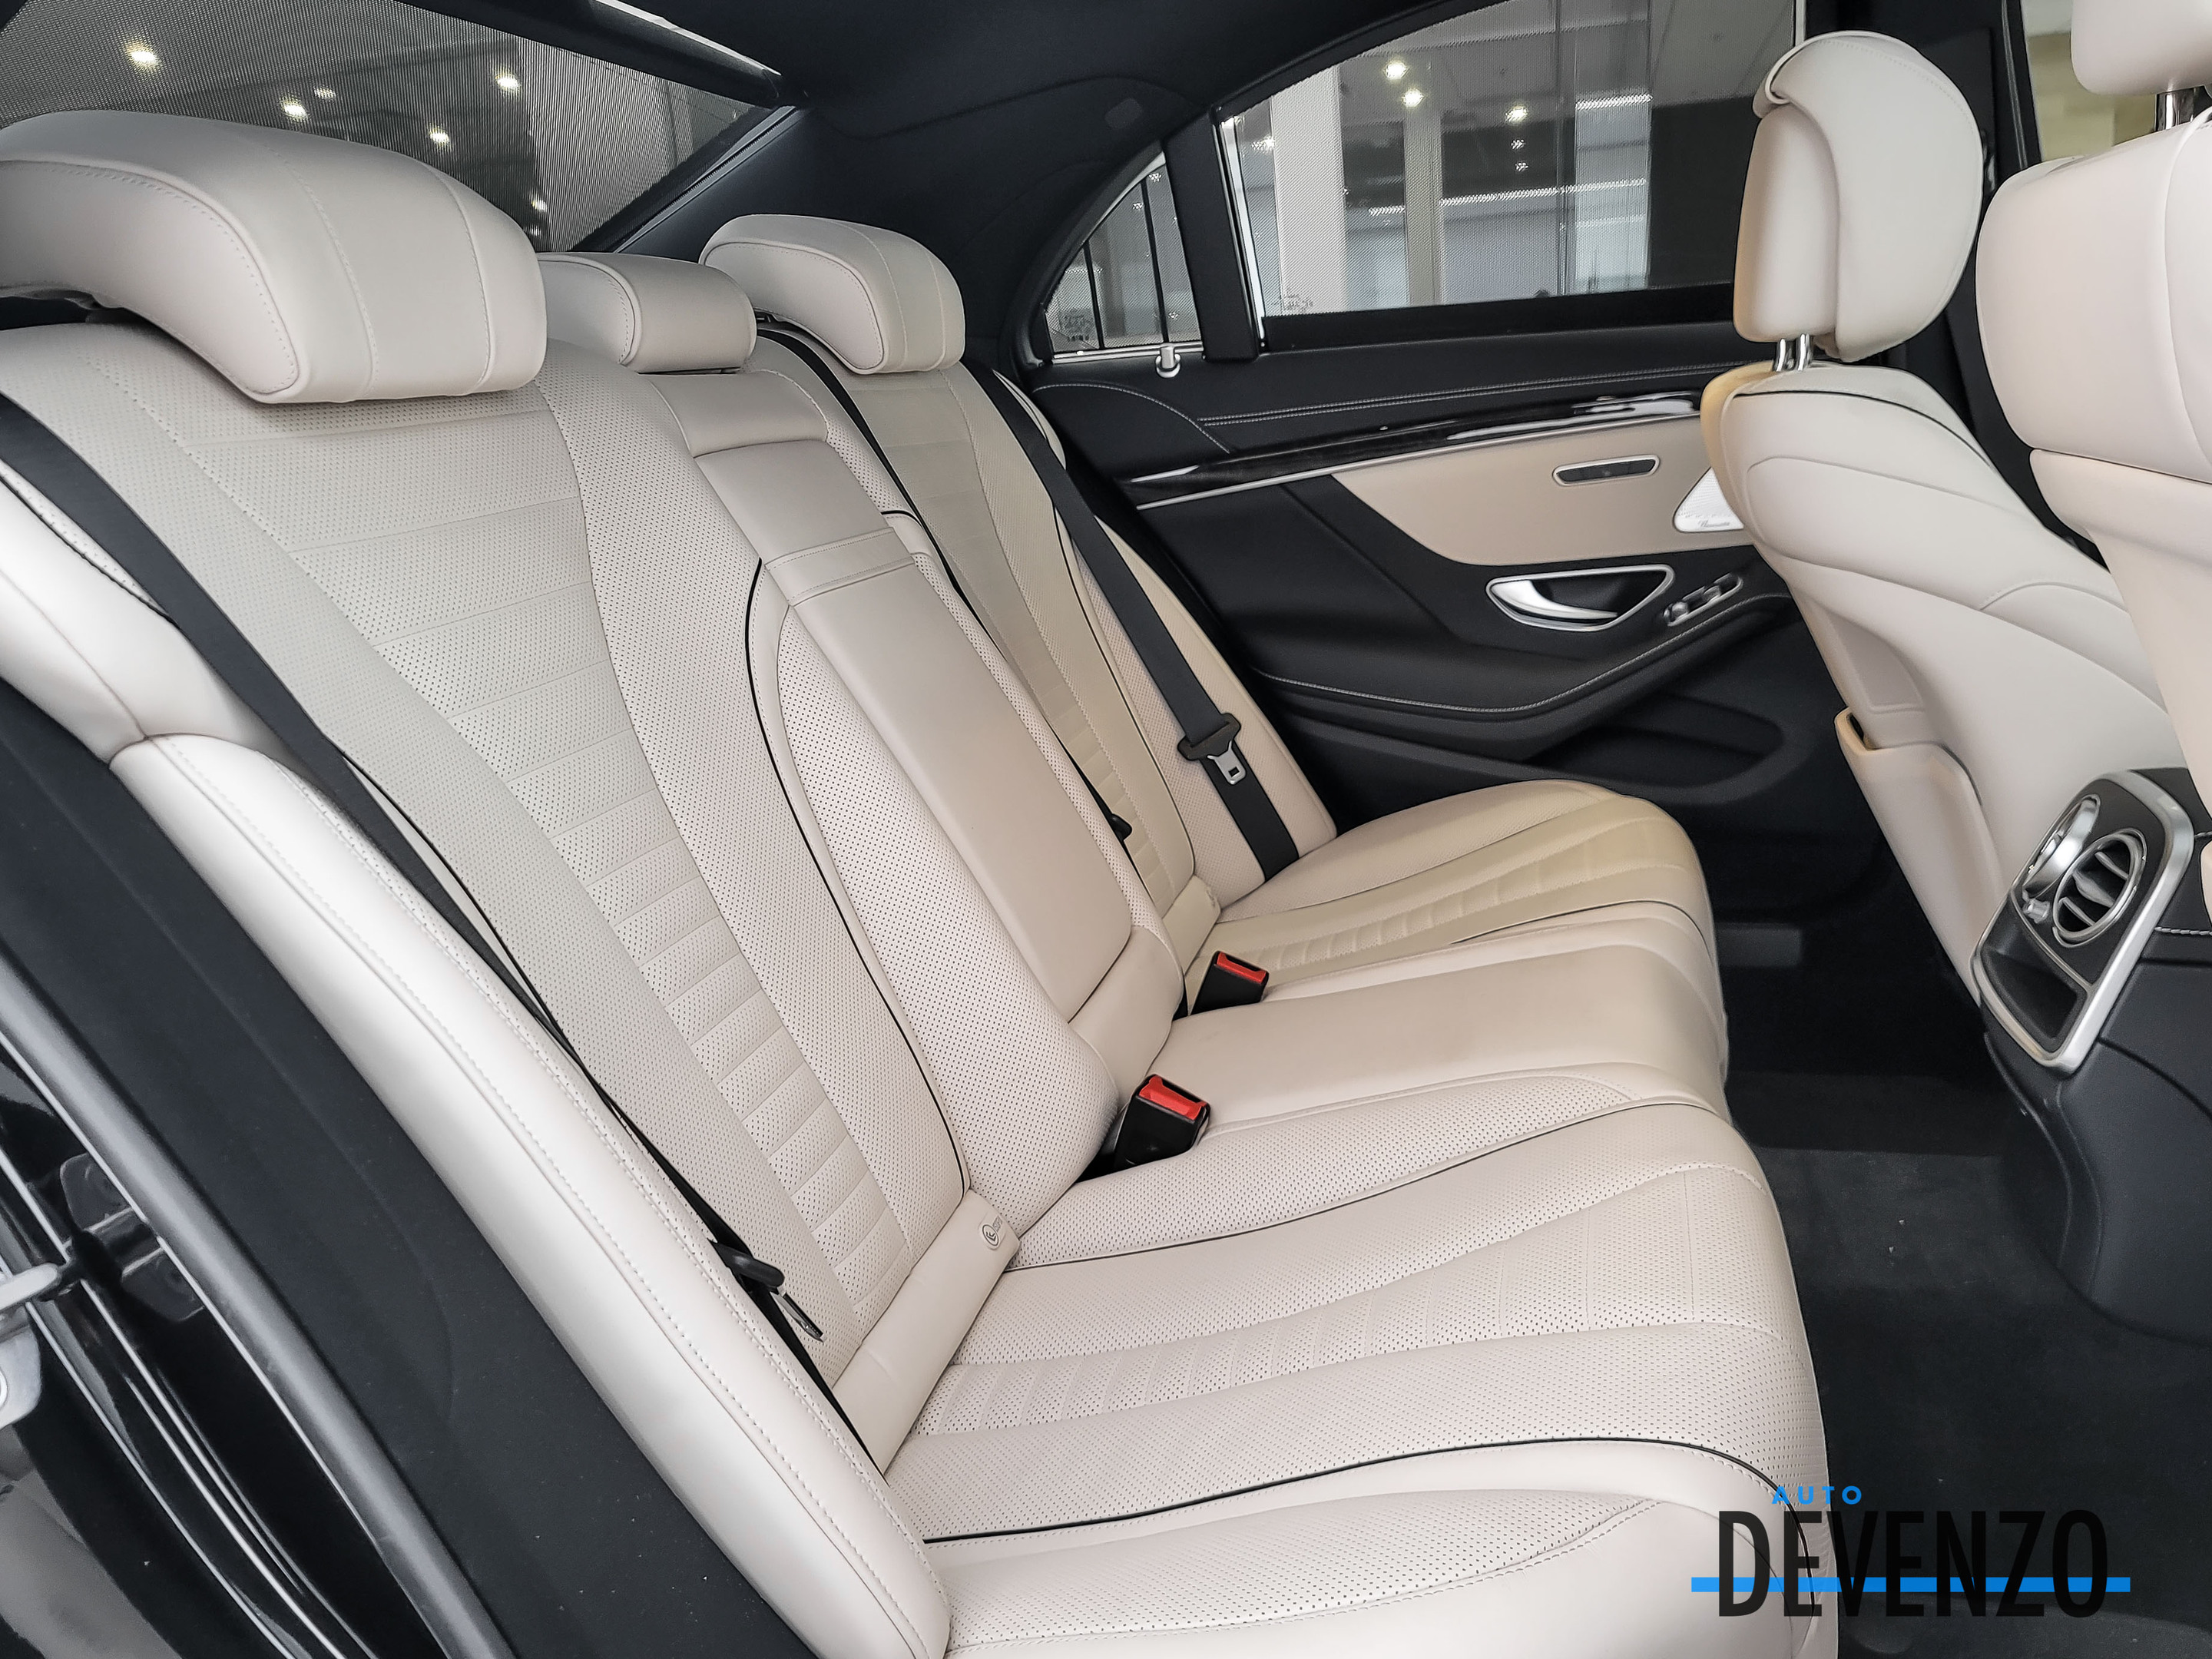 2018 Mercedes-Benz S-Class S450 4MATIC Intelligent Drive / AMG Sport Package complet